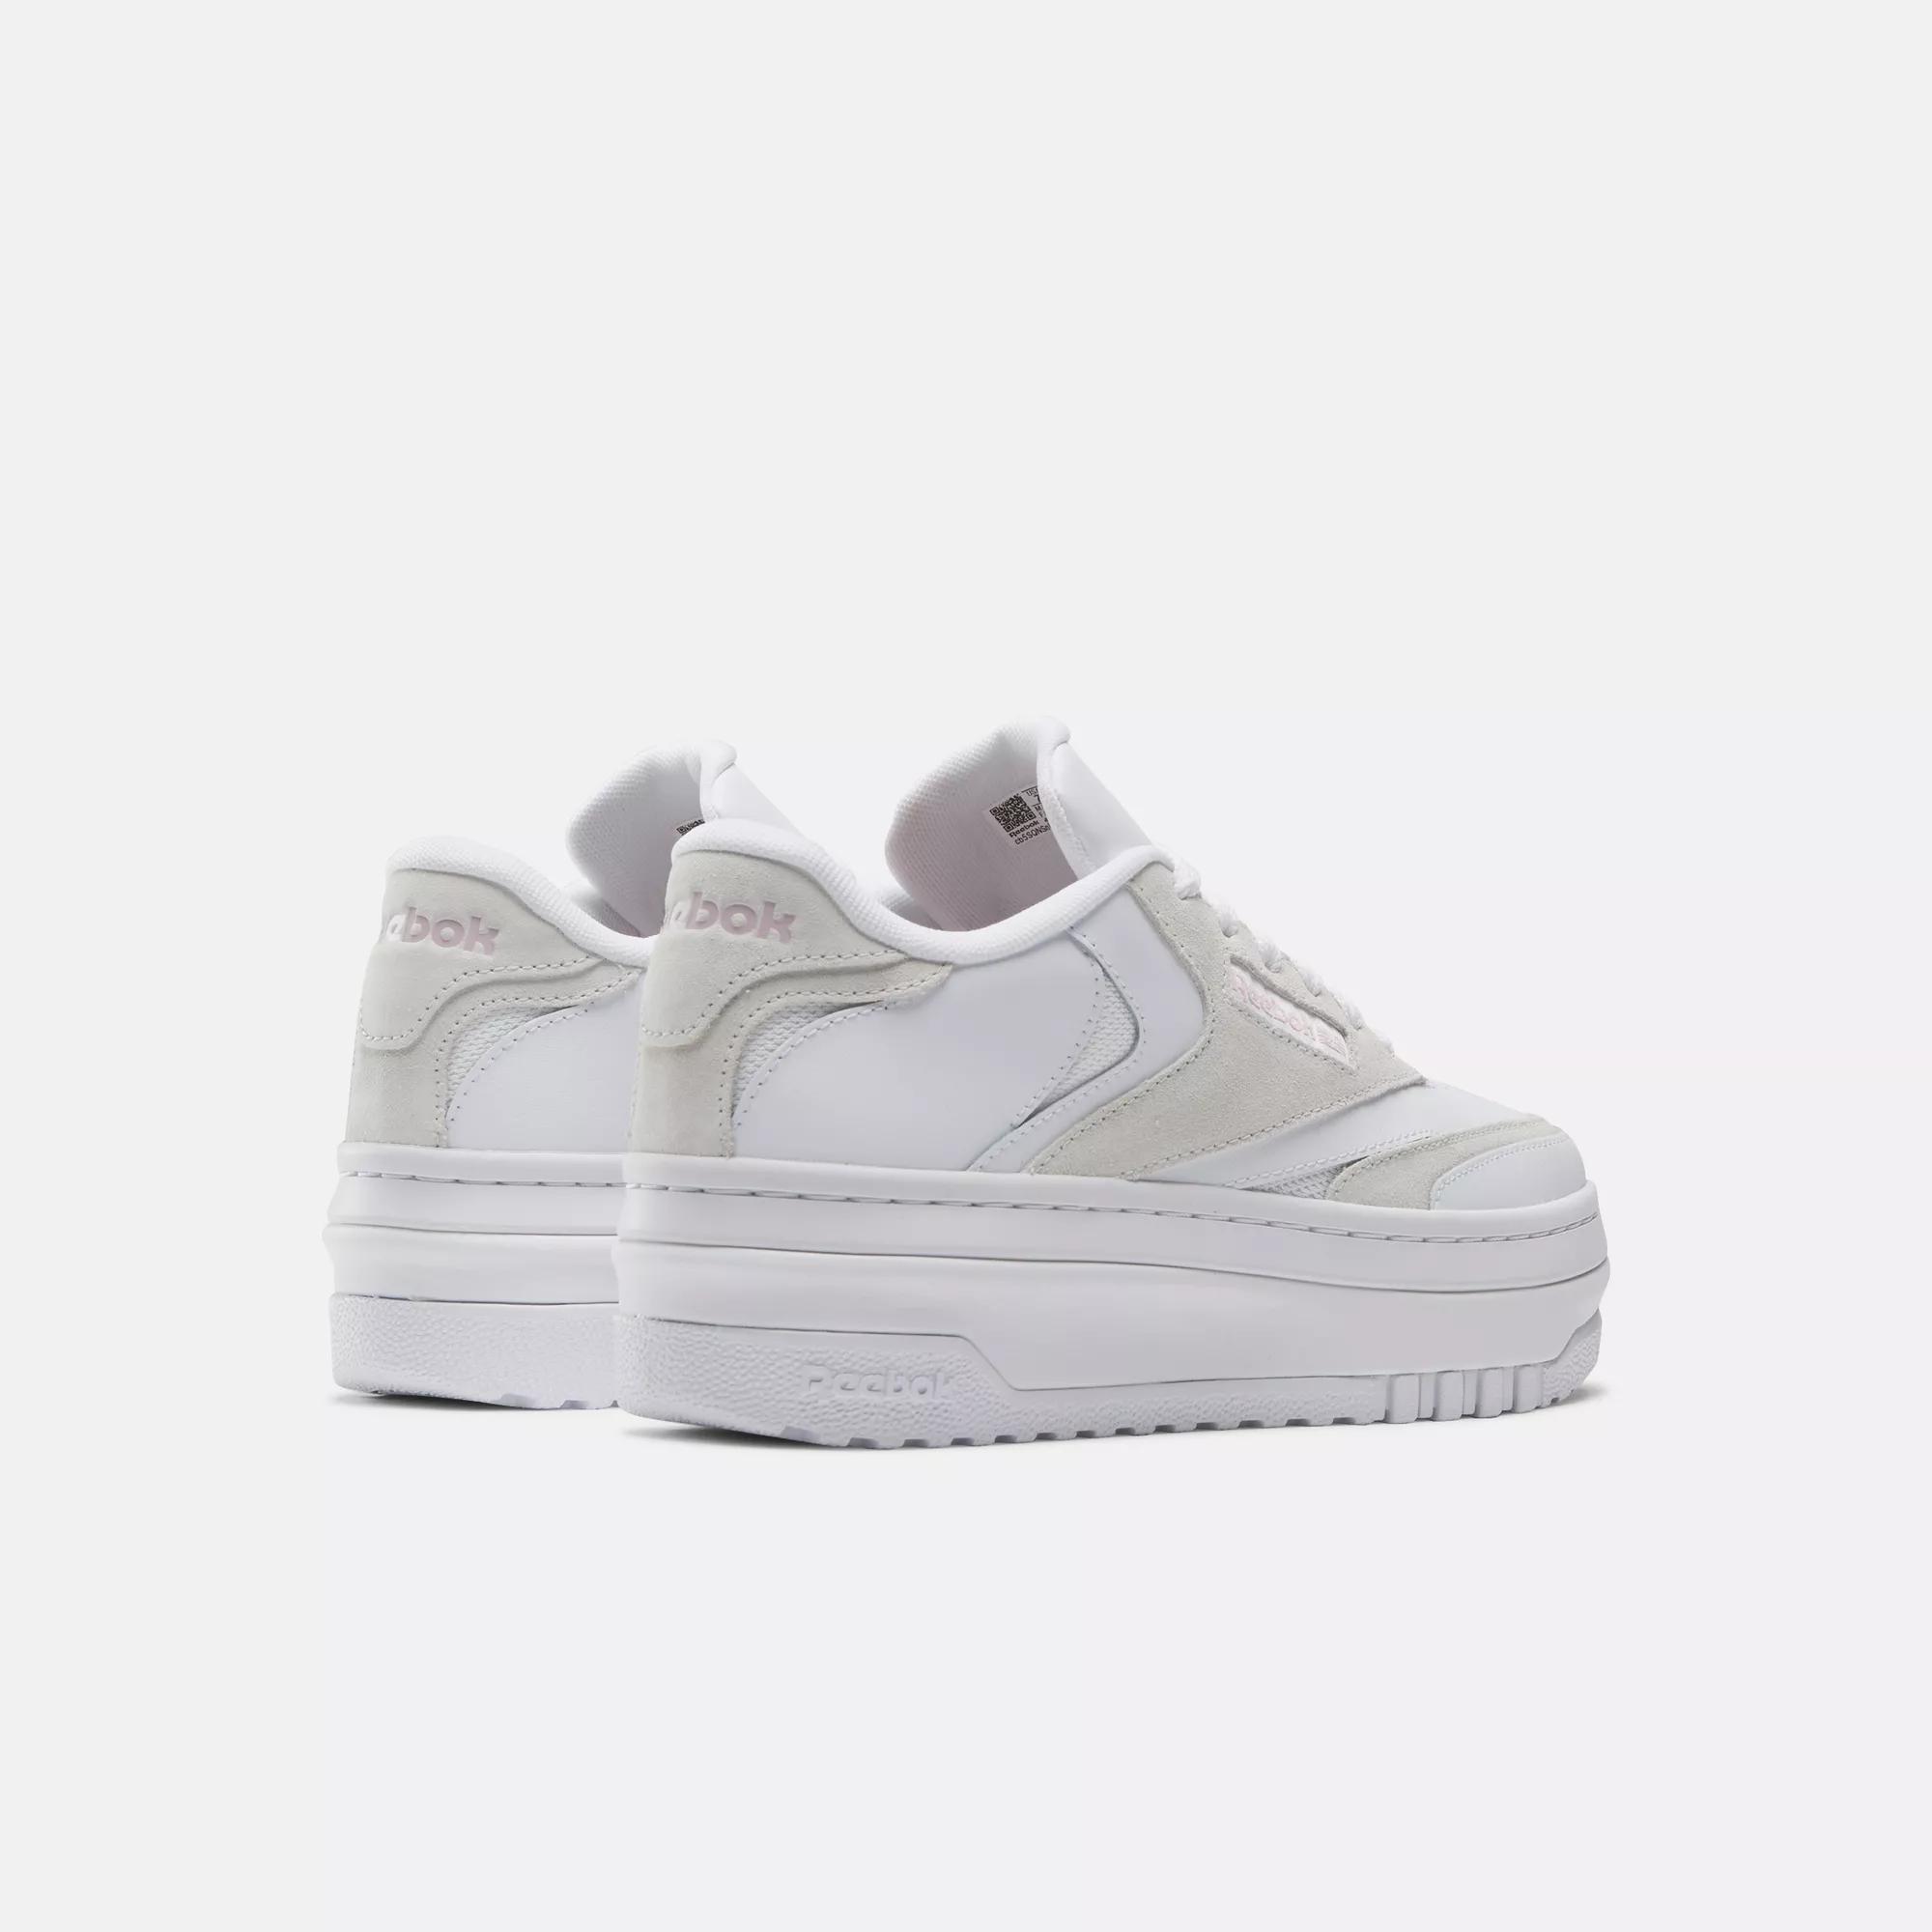 Club C Extra Shoes - Ftw Wht/Ashen Lilac/Pure Grey | Reebok